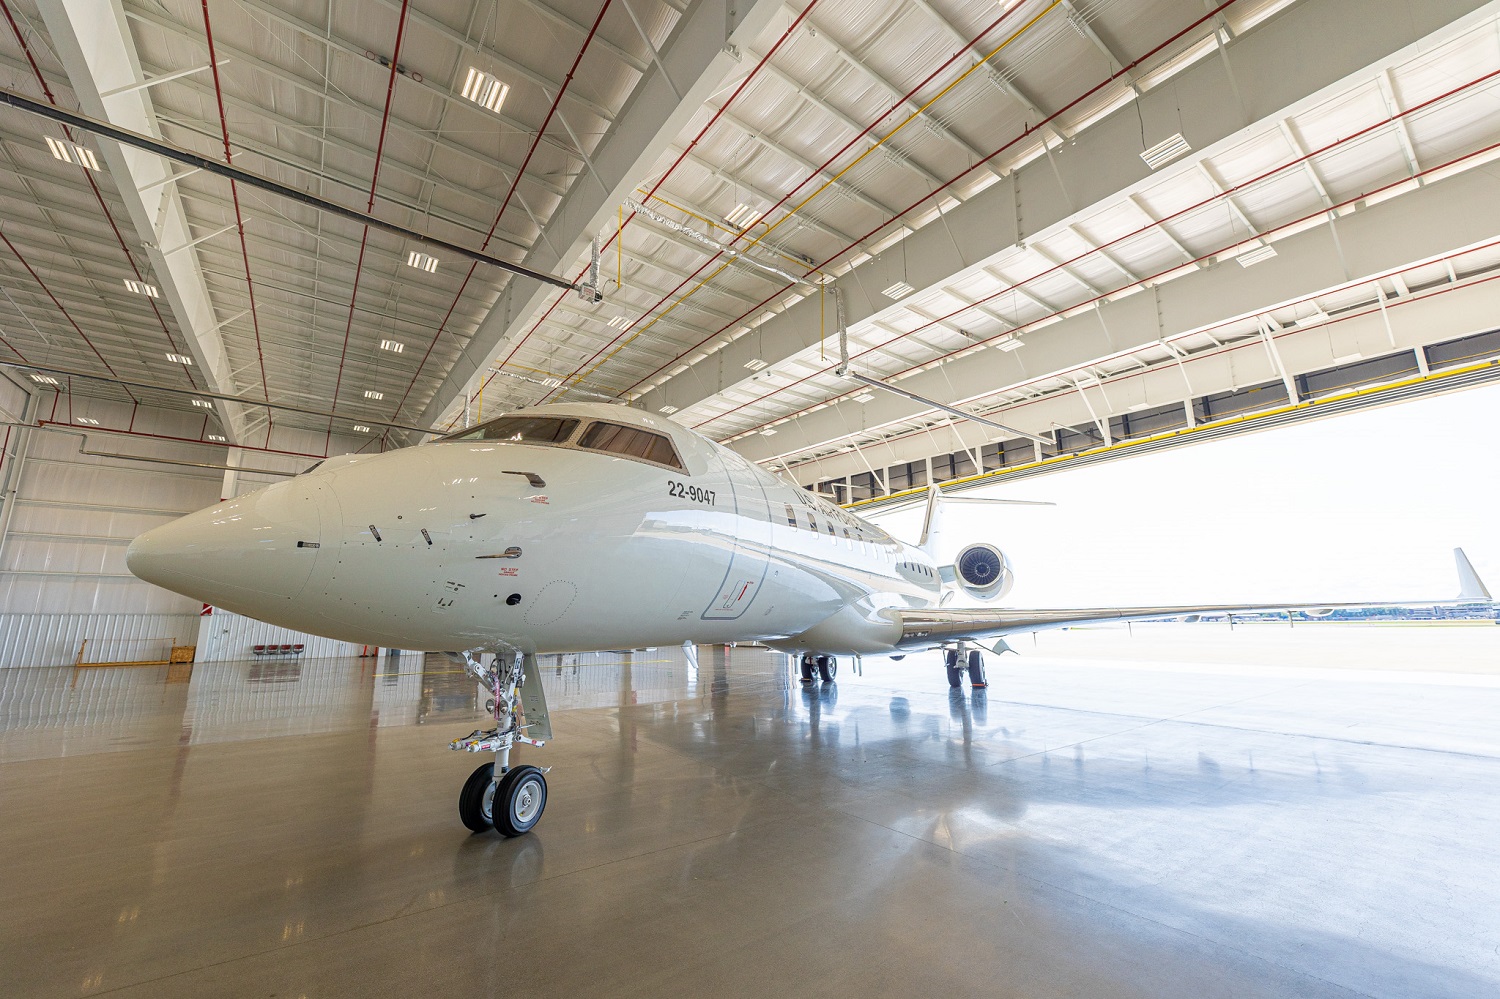 Bombardier Defense Delivers Global 6000 Aircraft to US Air Force BACN Program